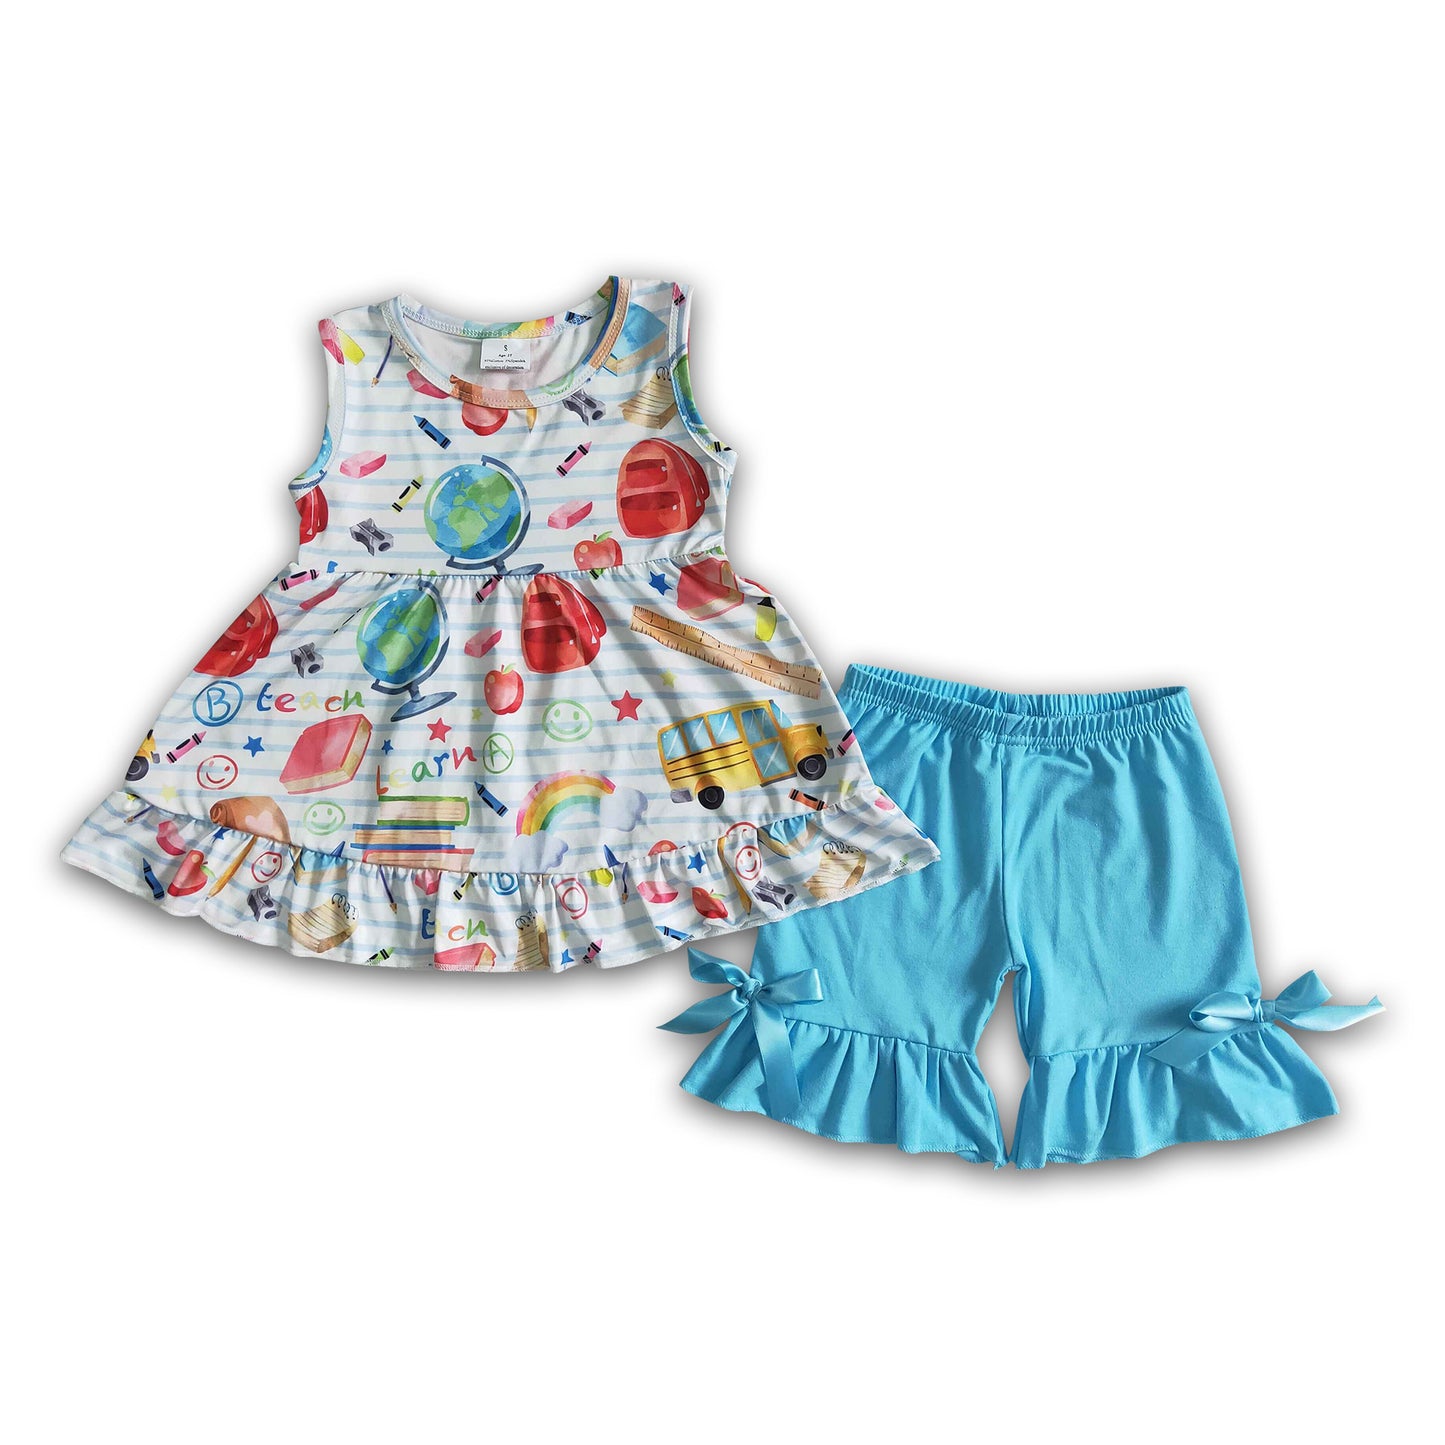 Learn book apple sleeveless girls back to school clothing